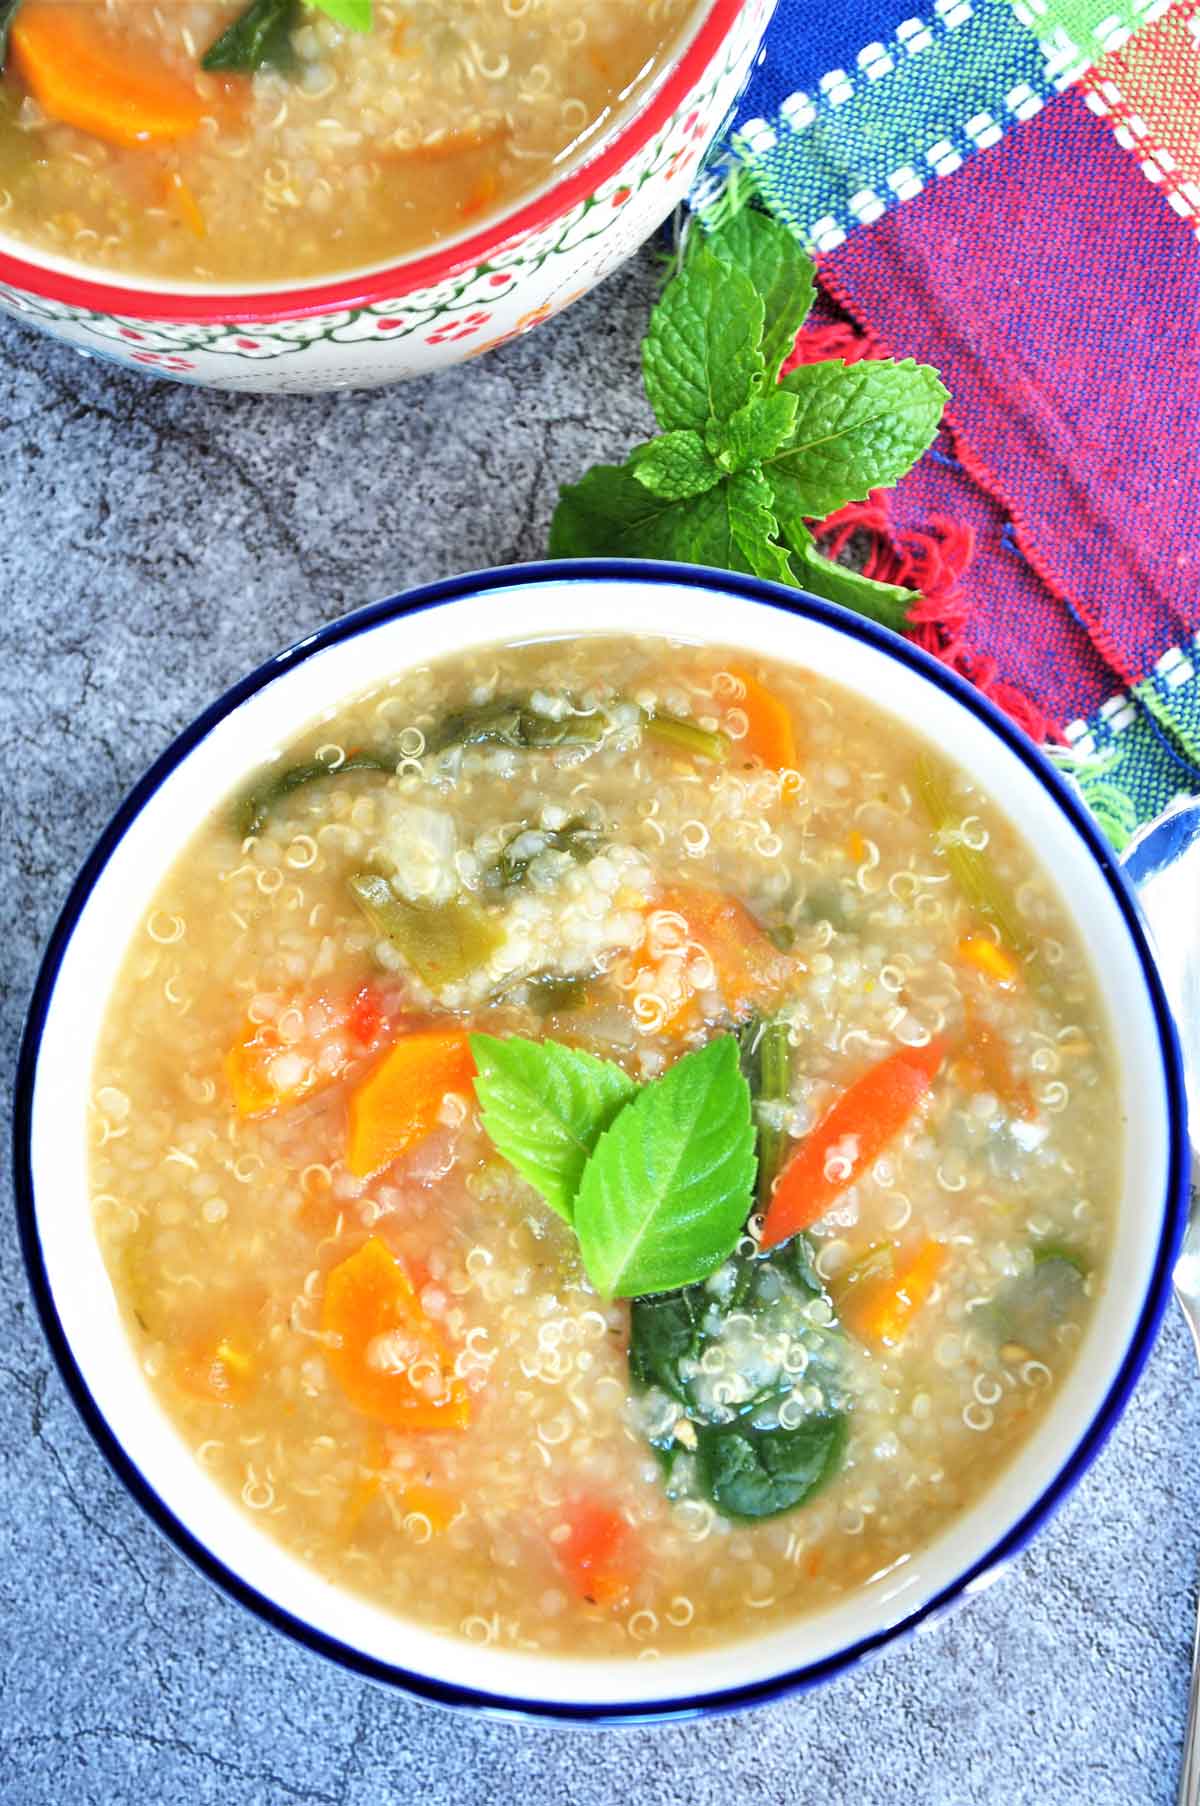 Quinoa Soup in a bowl garnished with basil leaves.